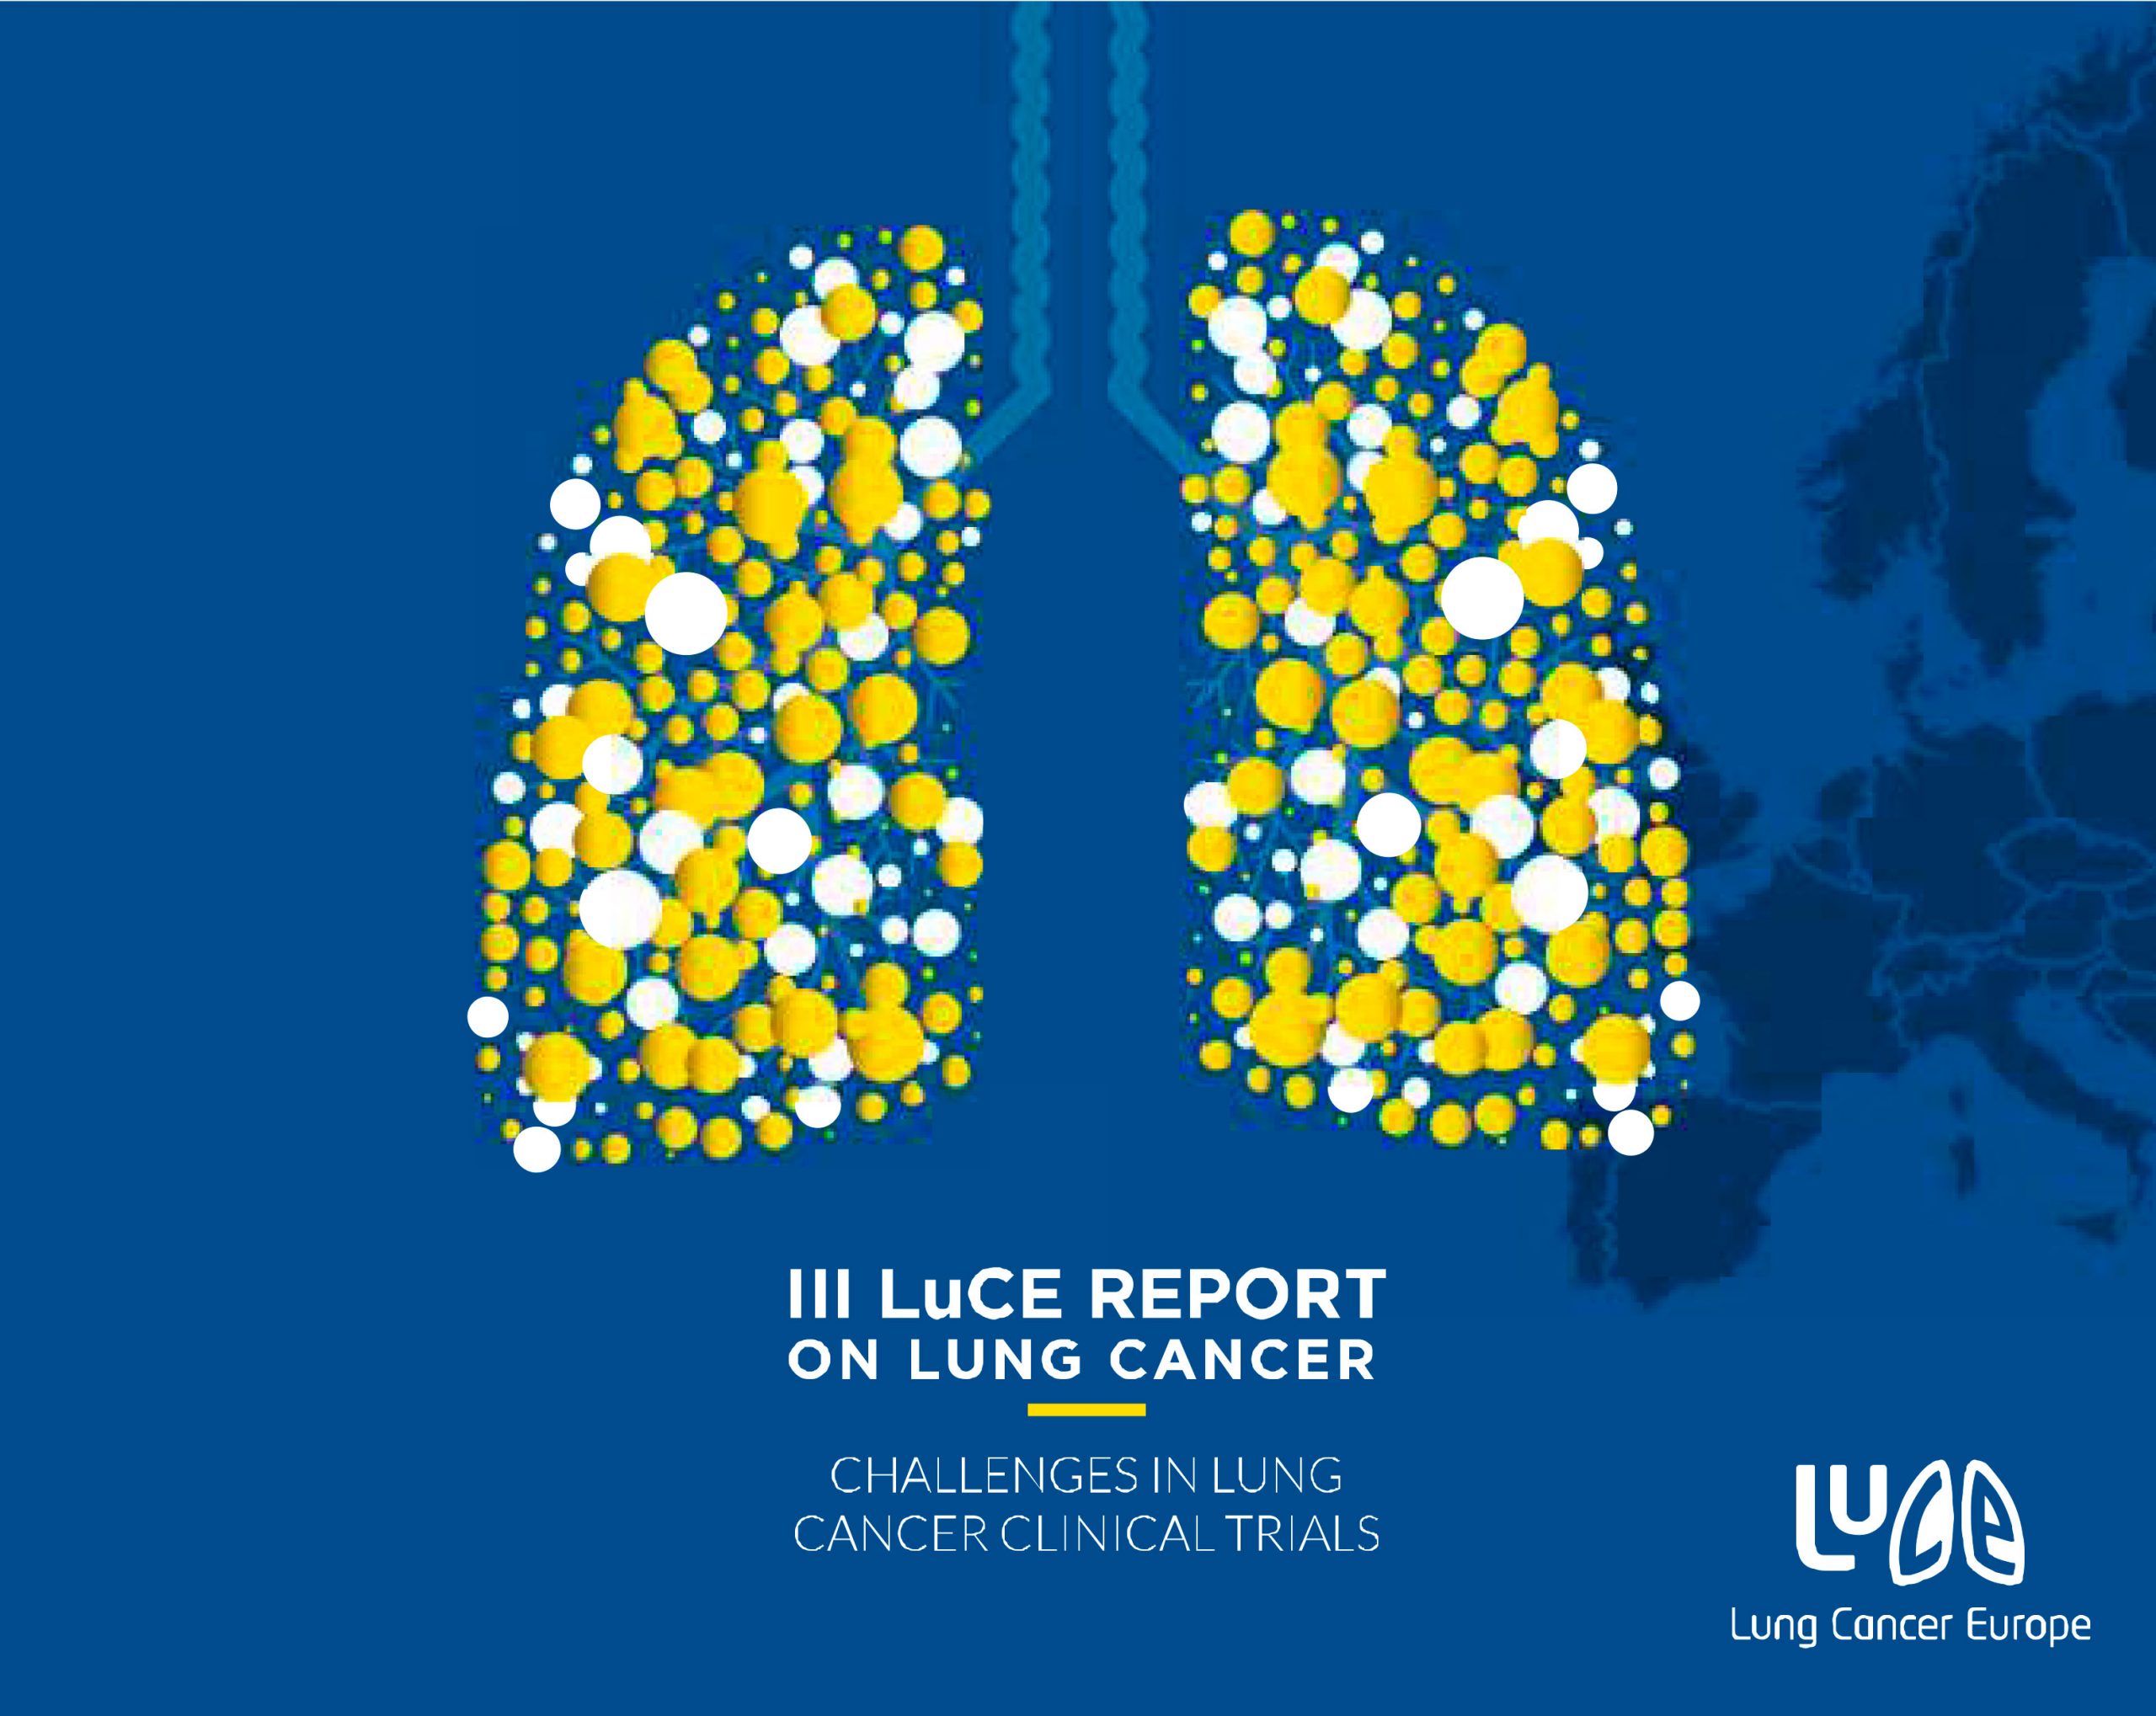 Luce Report 2018: Challenges in Lung Cancer Clinical Trials